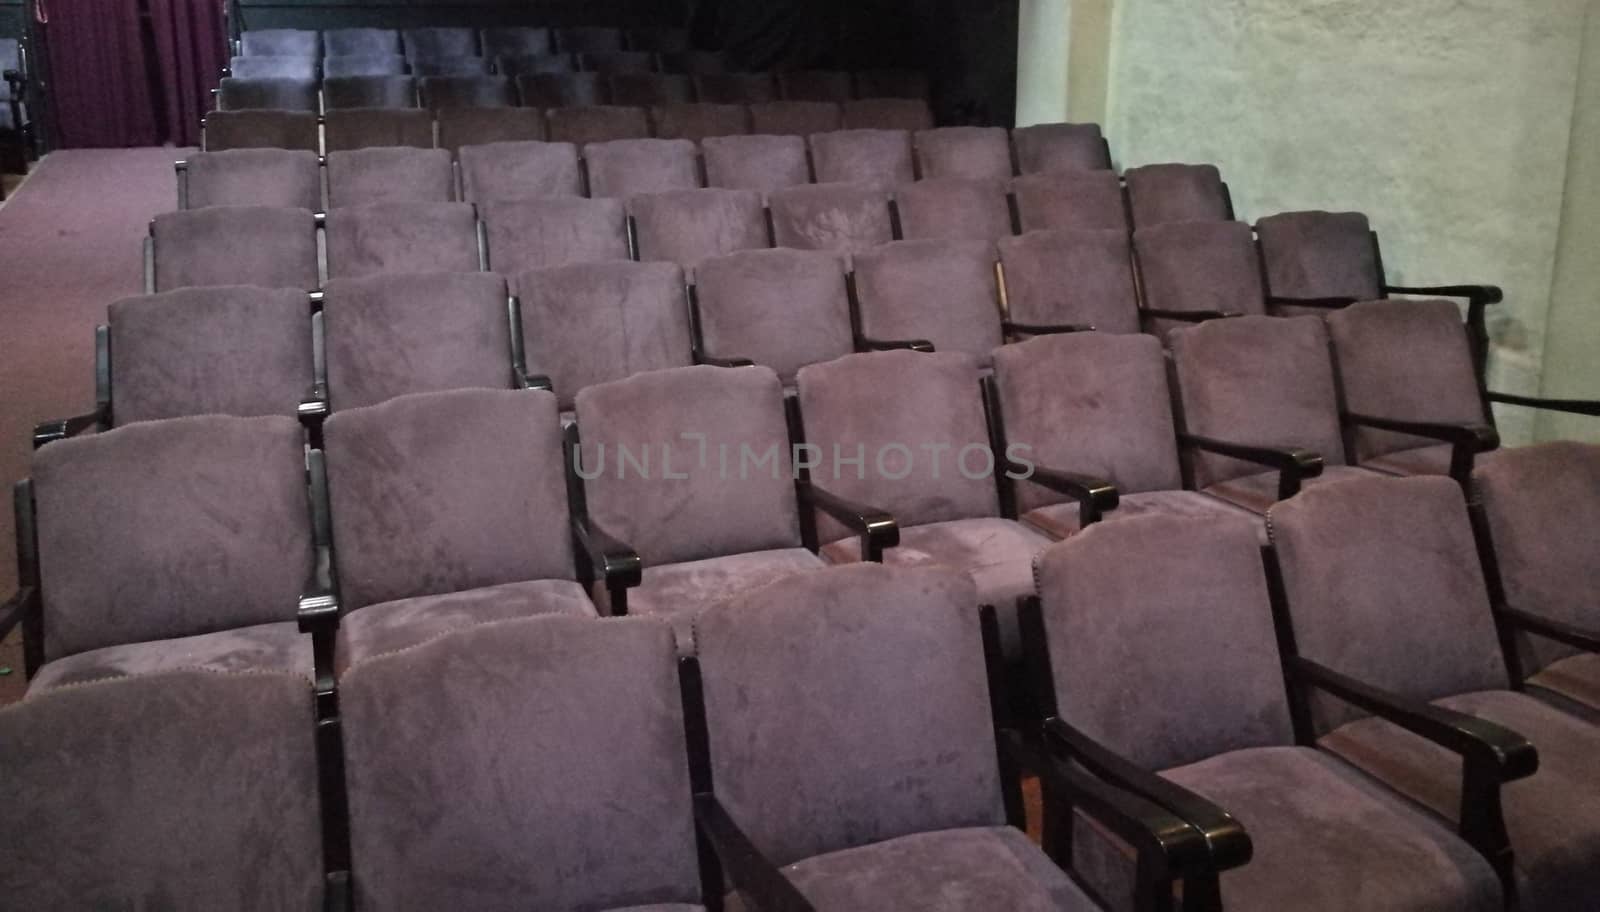 Classic purple theater seats in many rows